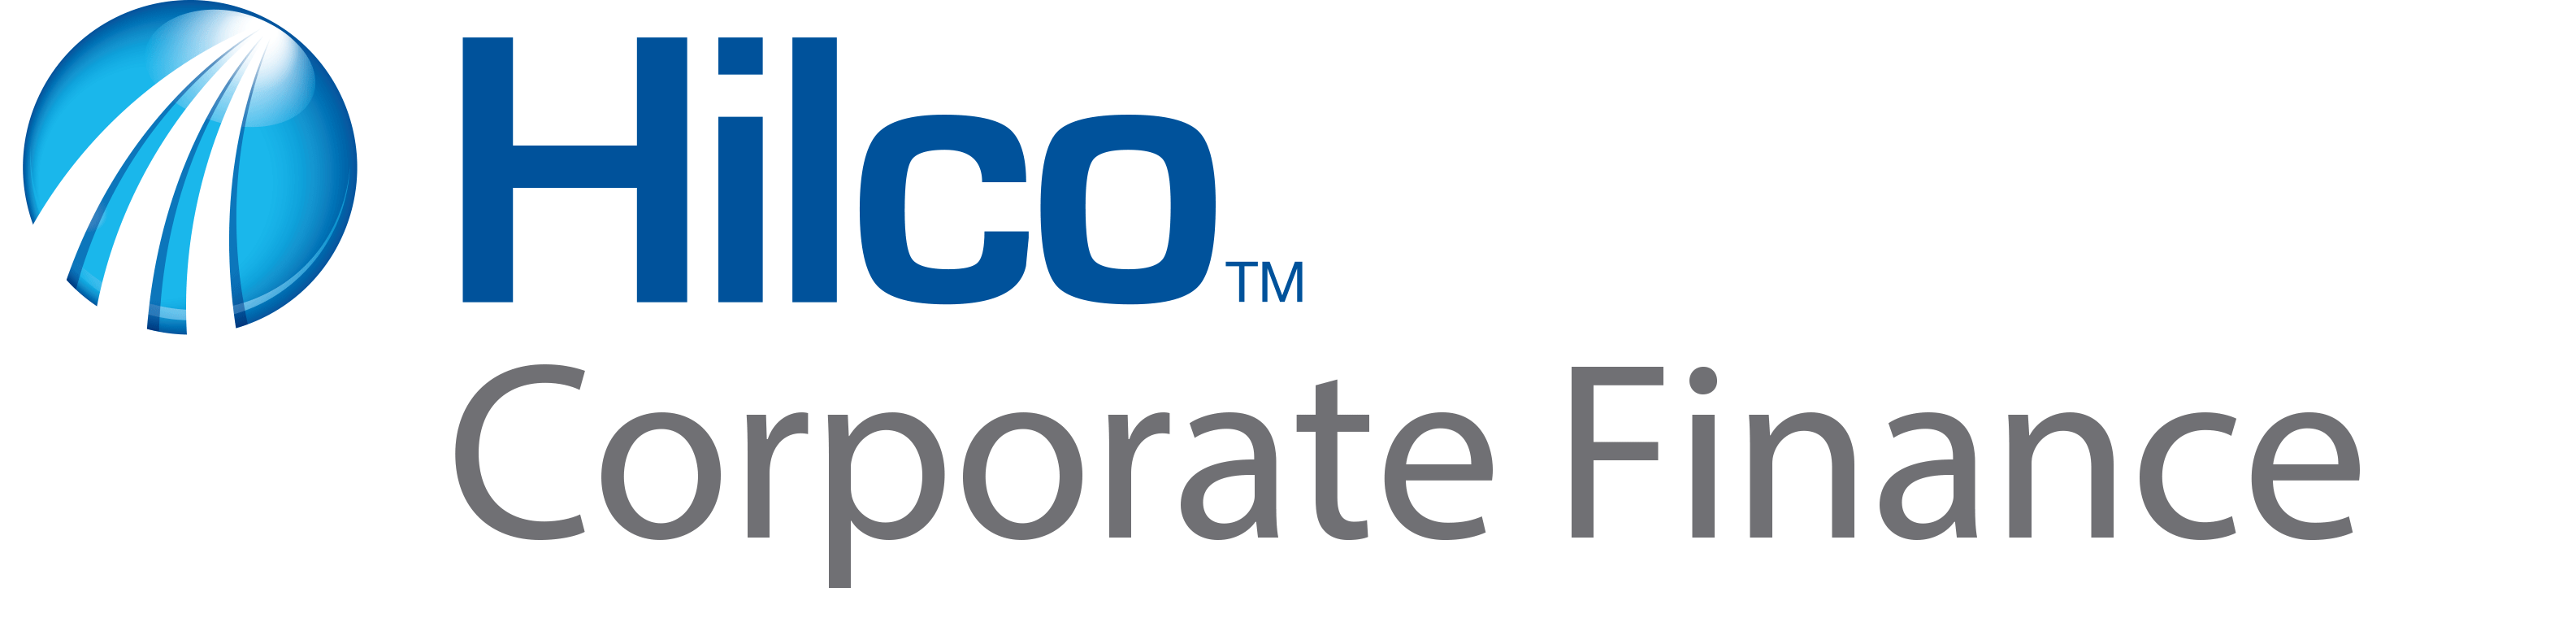 Corporate Finance Logo - Hilco Global - Business Solutions & Financial Services